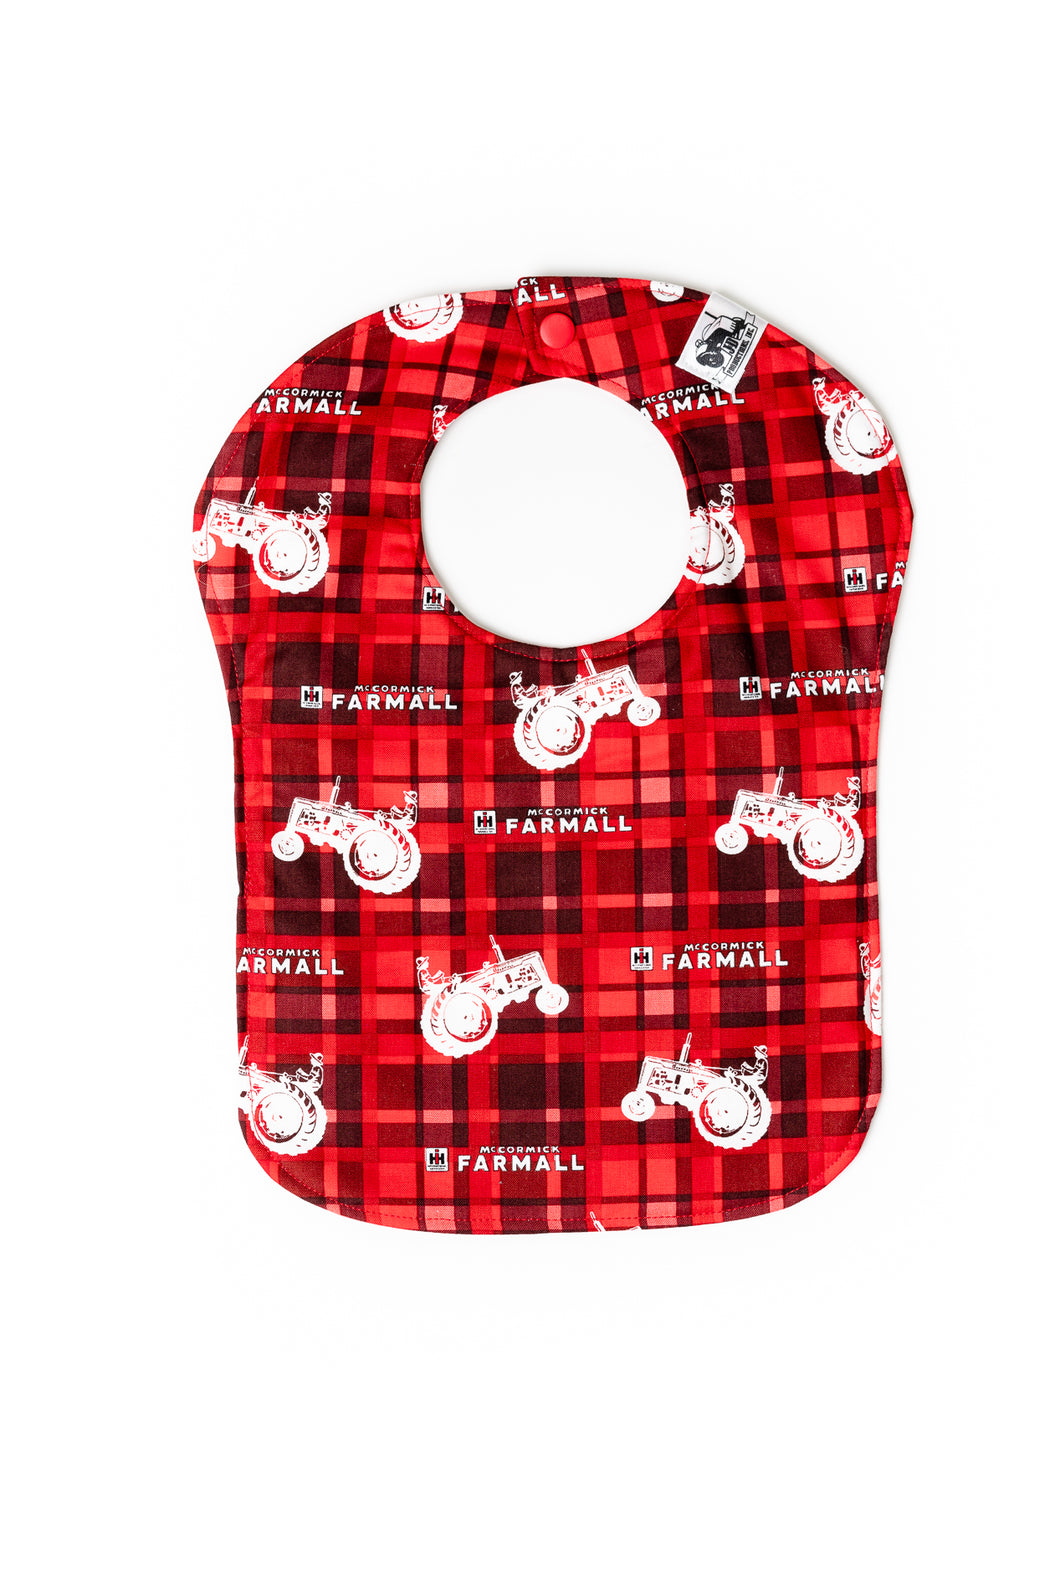 Farmall Tractor Baby Bib, Red Plaid with Tractor Silhouettes